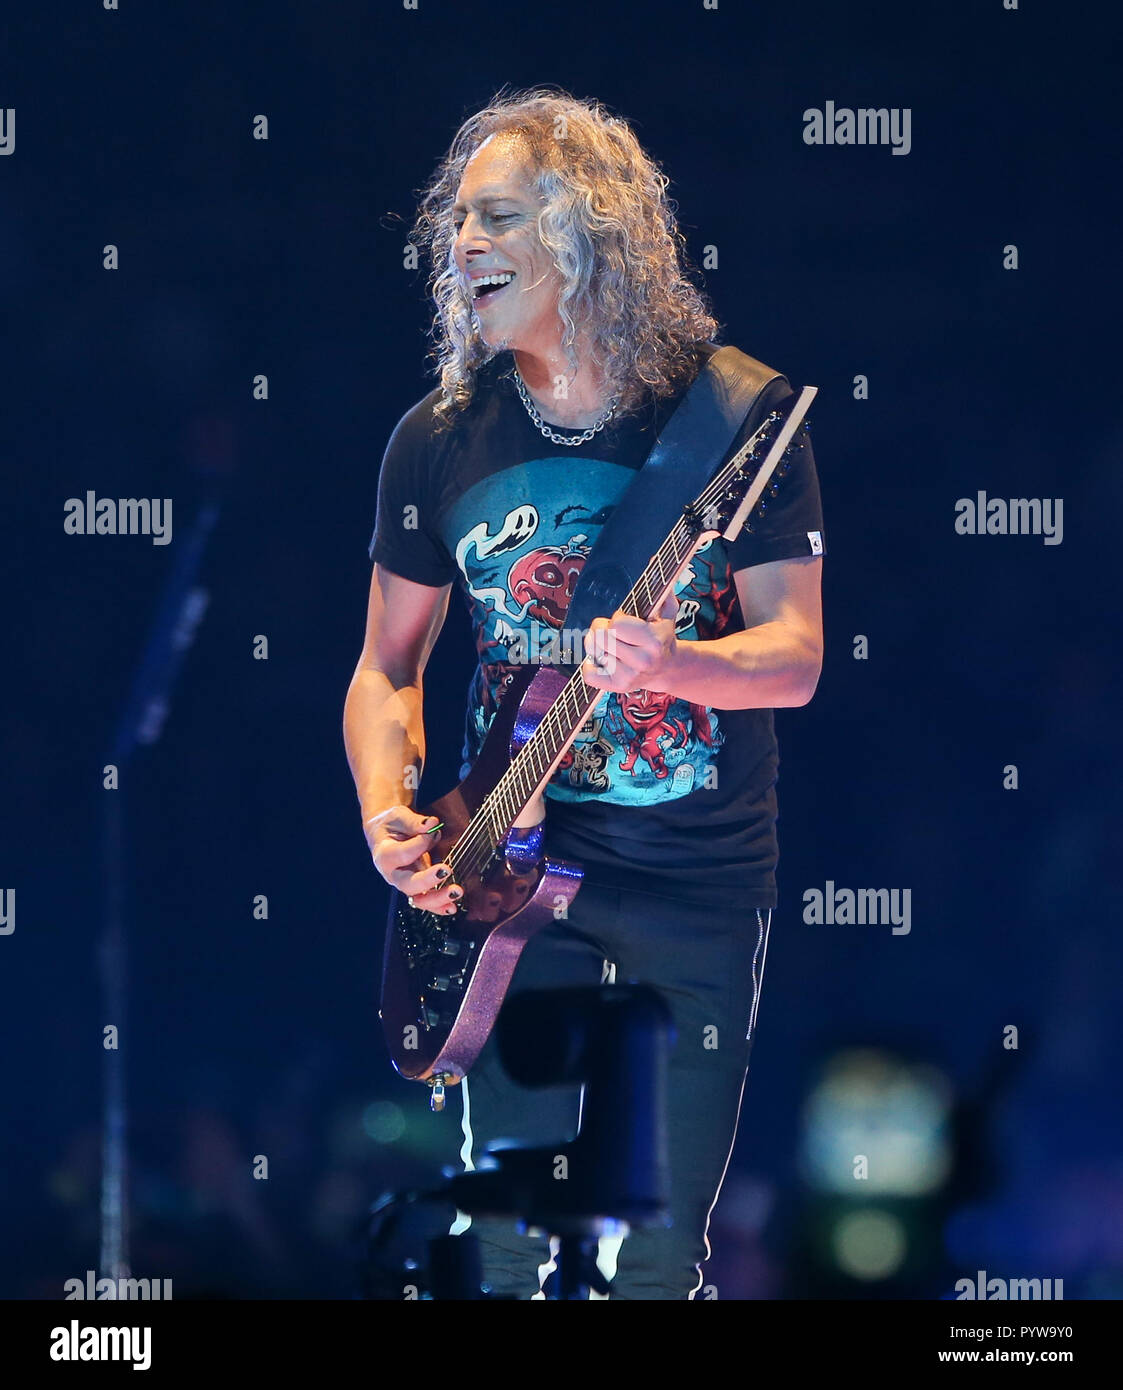 Albany, New York, USA. 29th October, 2018. Kirk Hammett of Metallica performs in concert at Times Union Center on October 29, 2018 in Albany, New York. Credit: Debby Wong/Alamy Live News Stock Photo